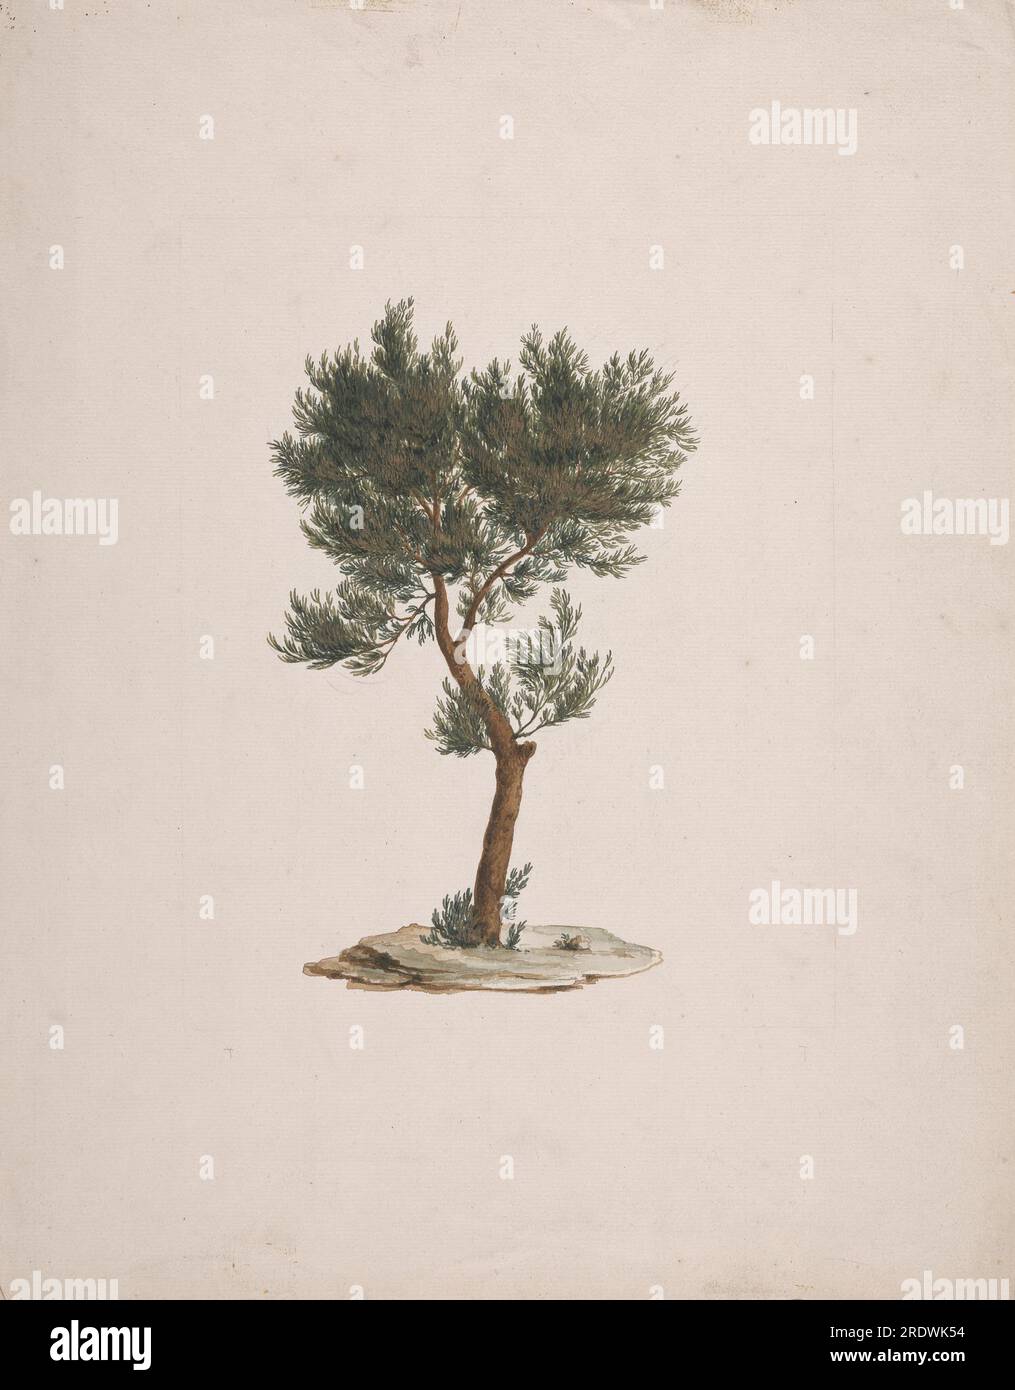 Juniperus procera Endl. (African Pencil Cedar): finished drawing of trees's habit by James Bruce Stock Photo